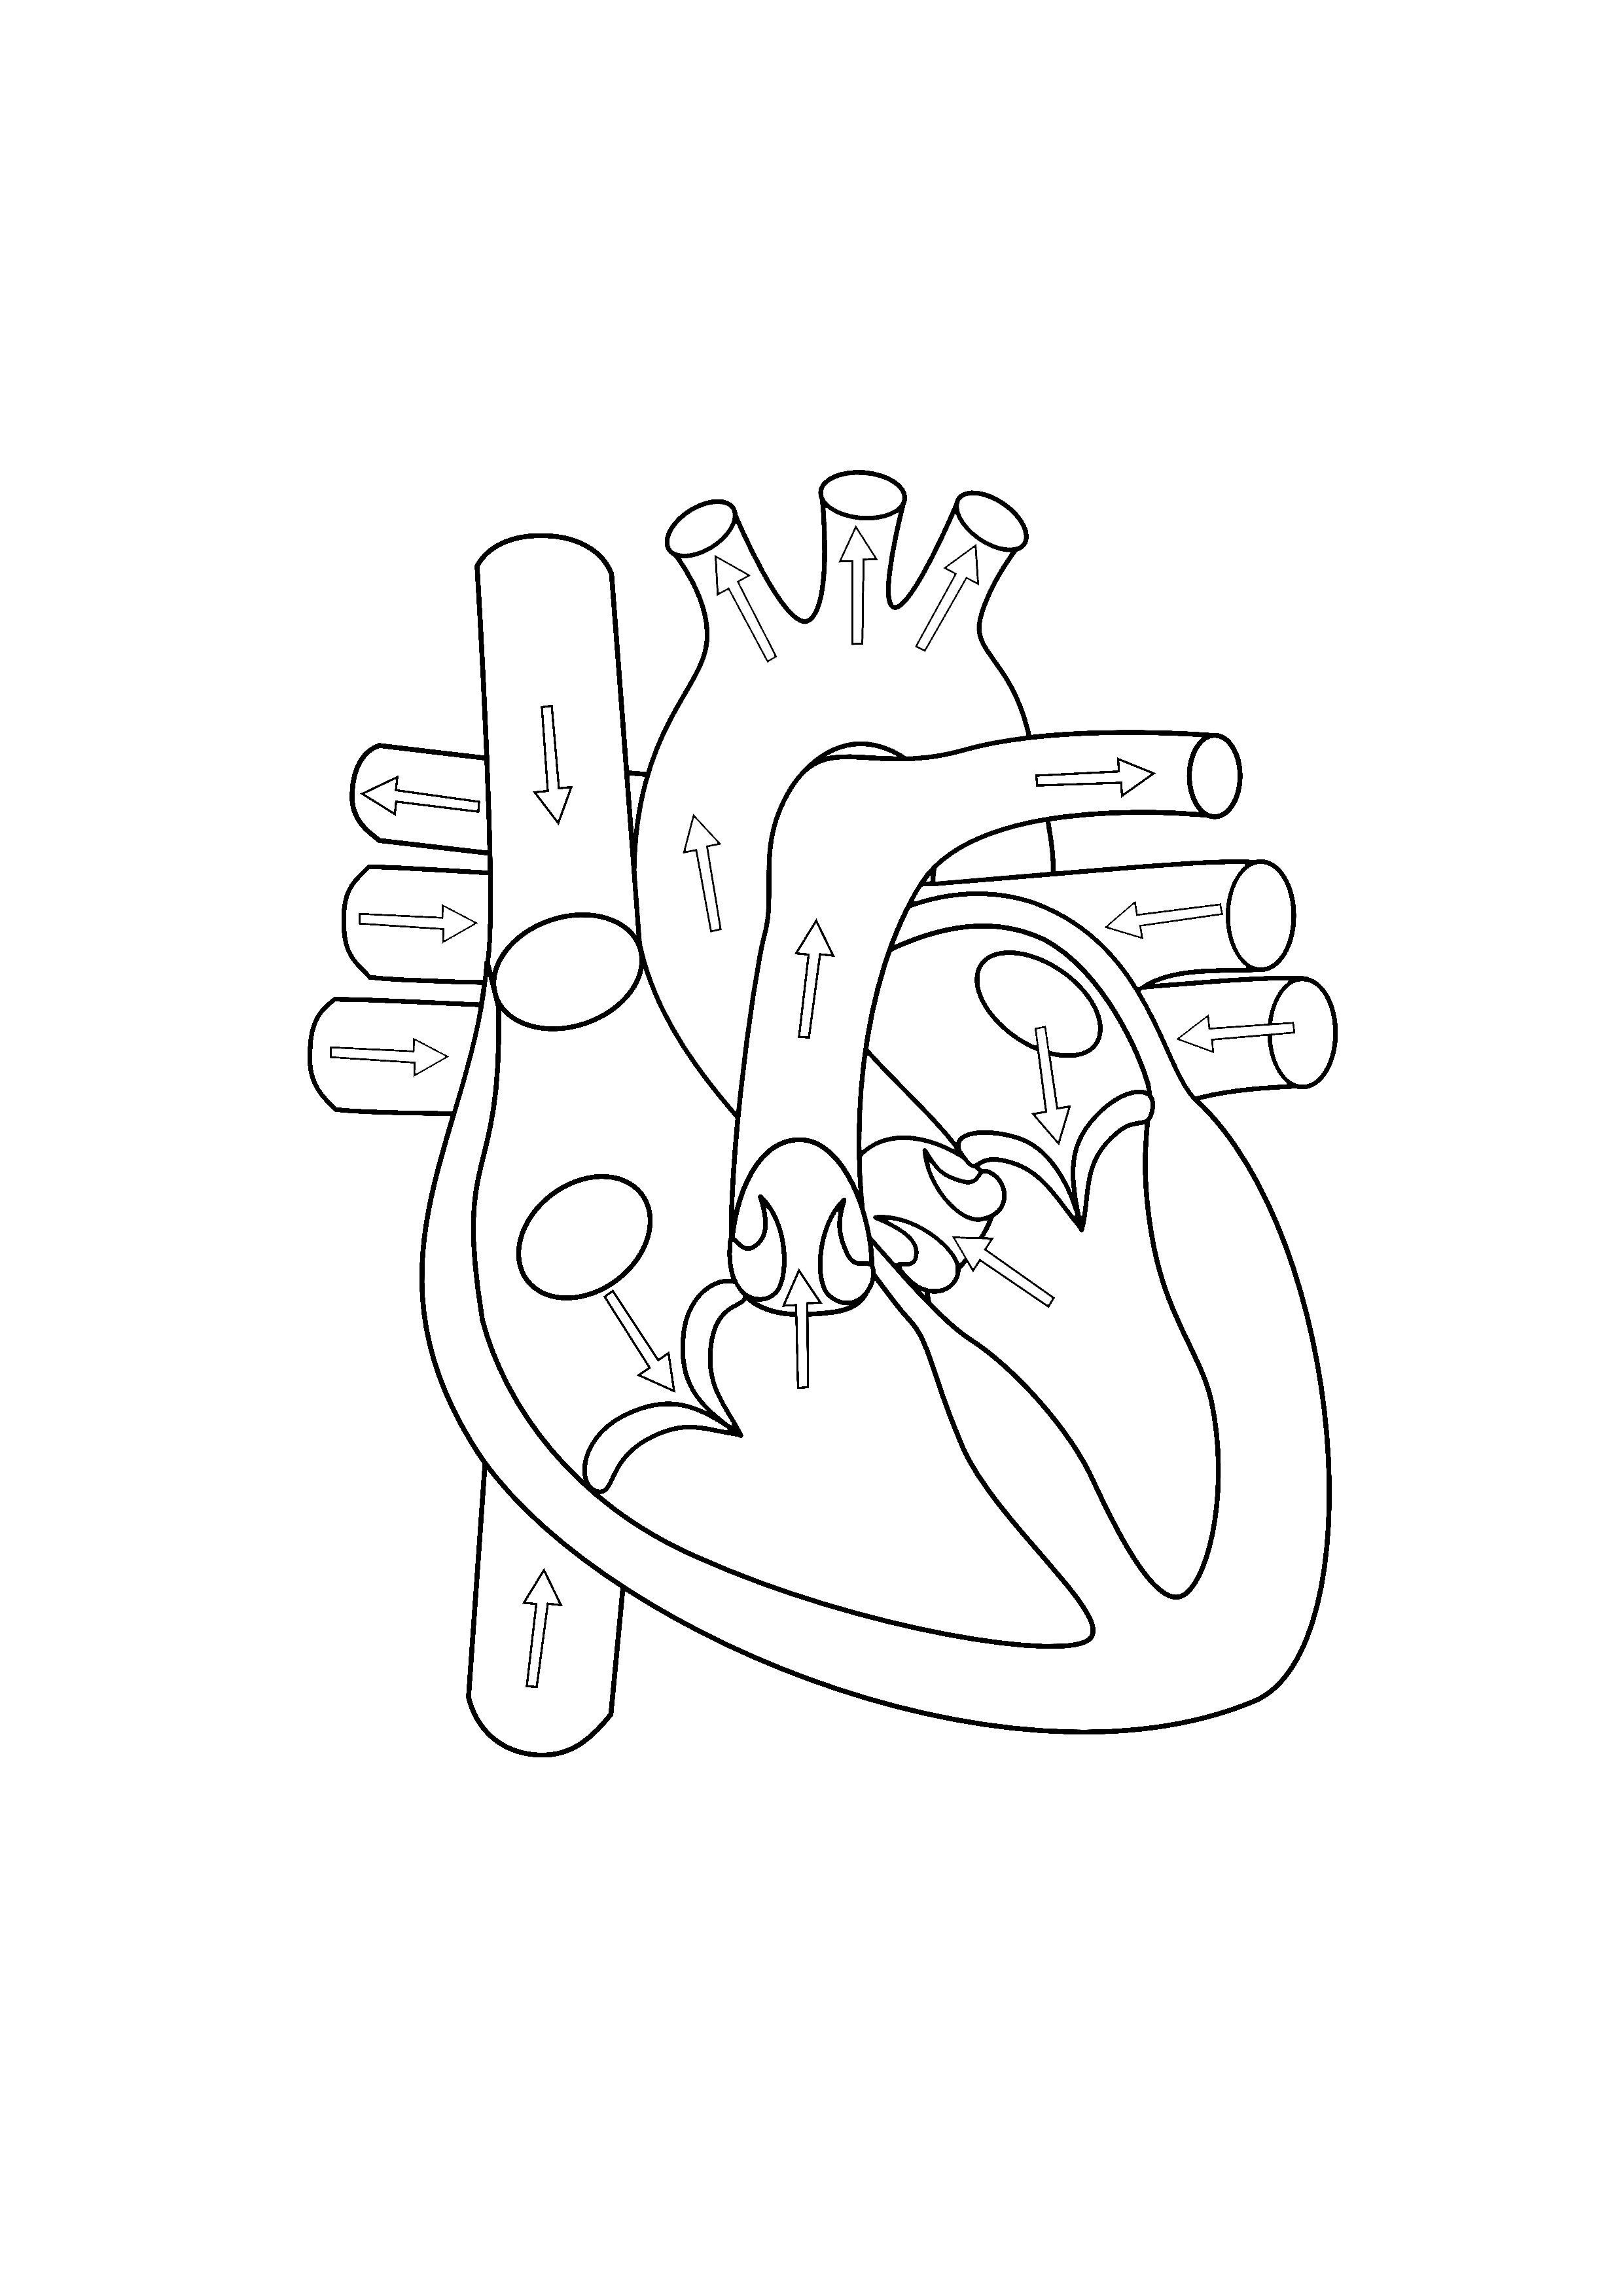 Printable Heart Diagram Human Heart Diagram without Labels